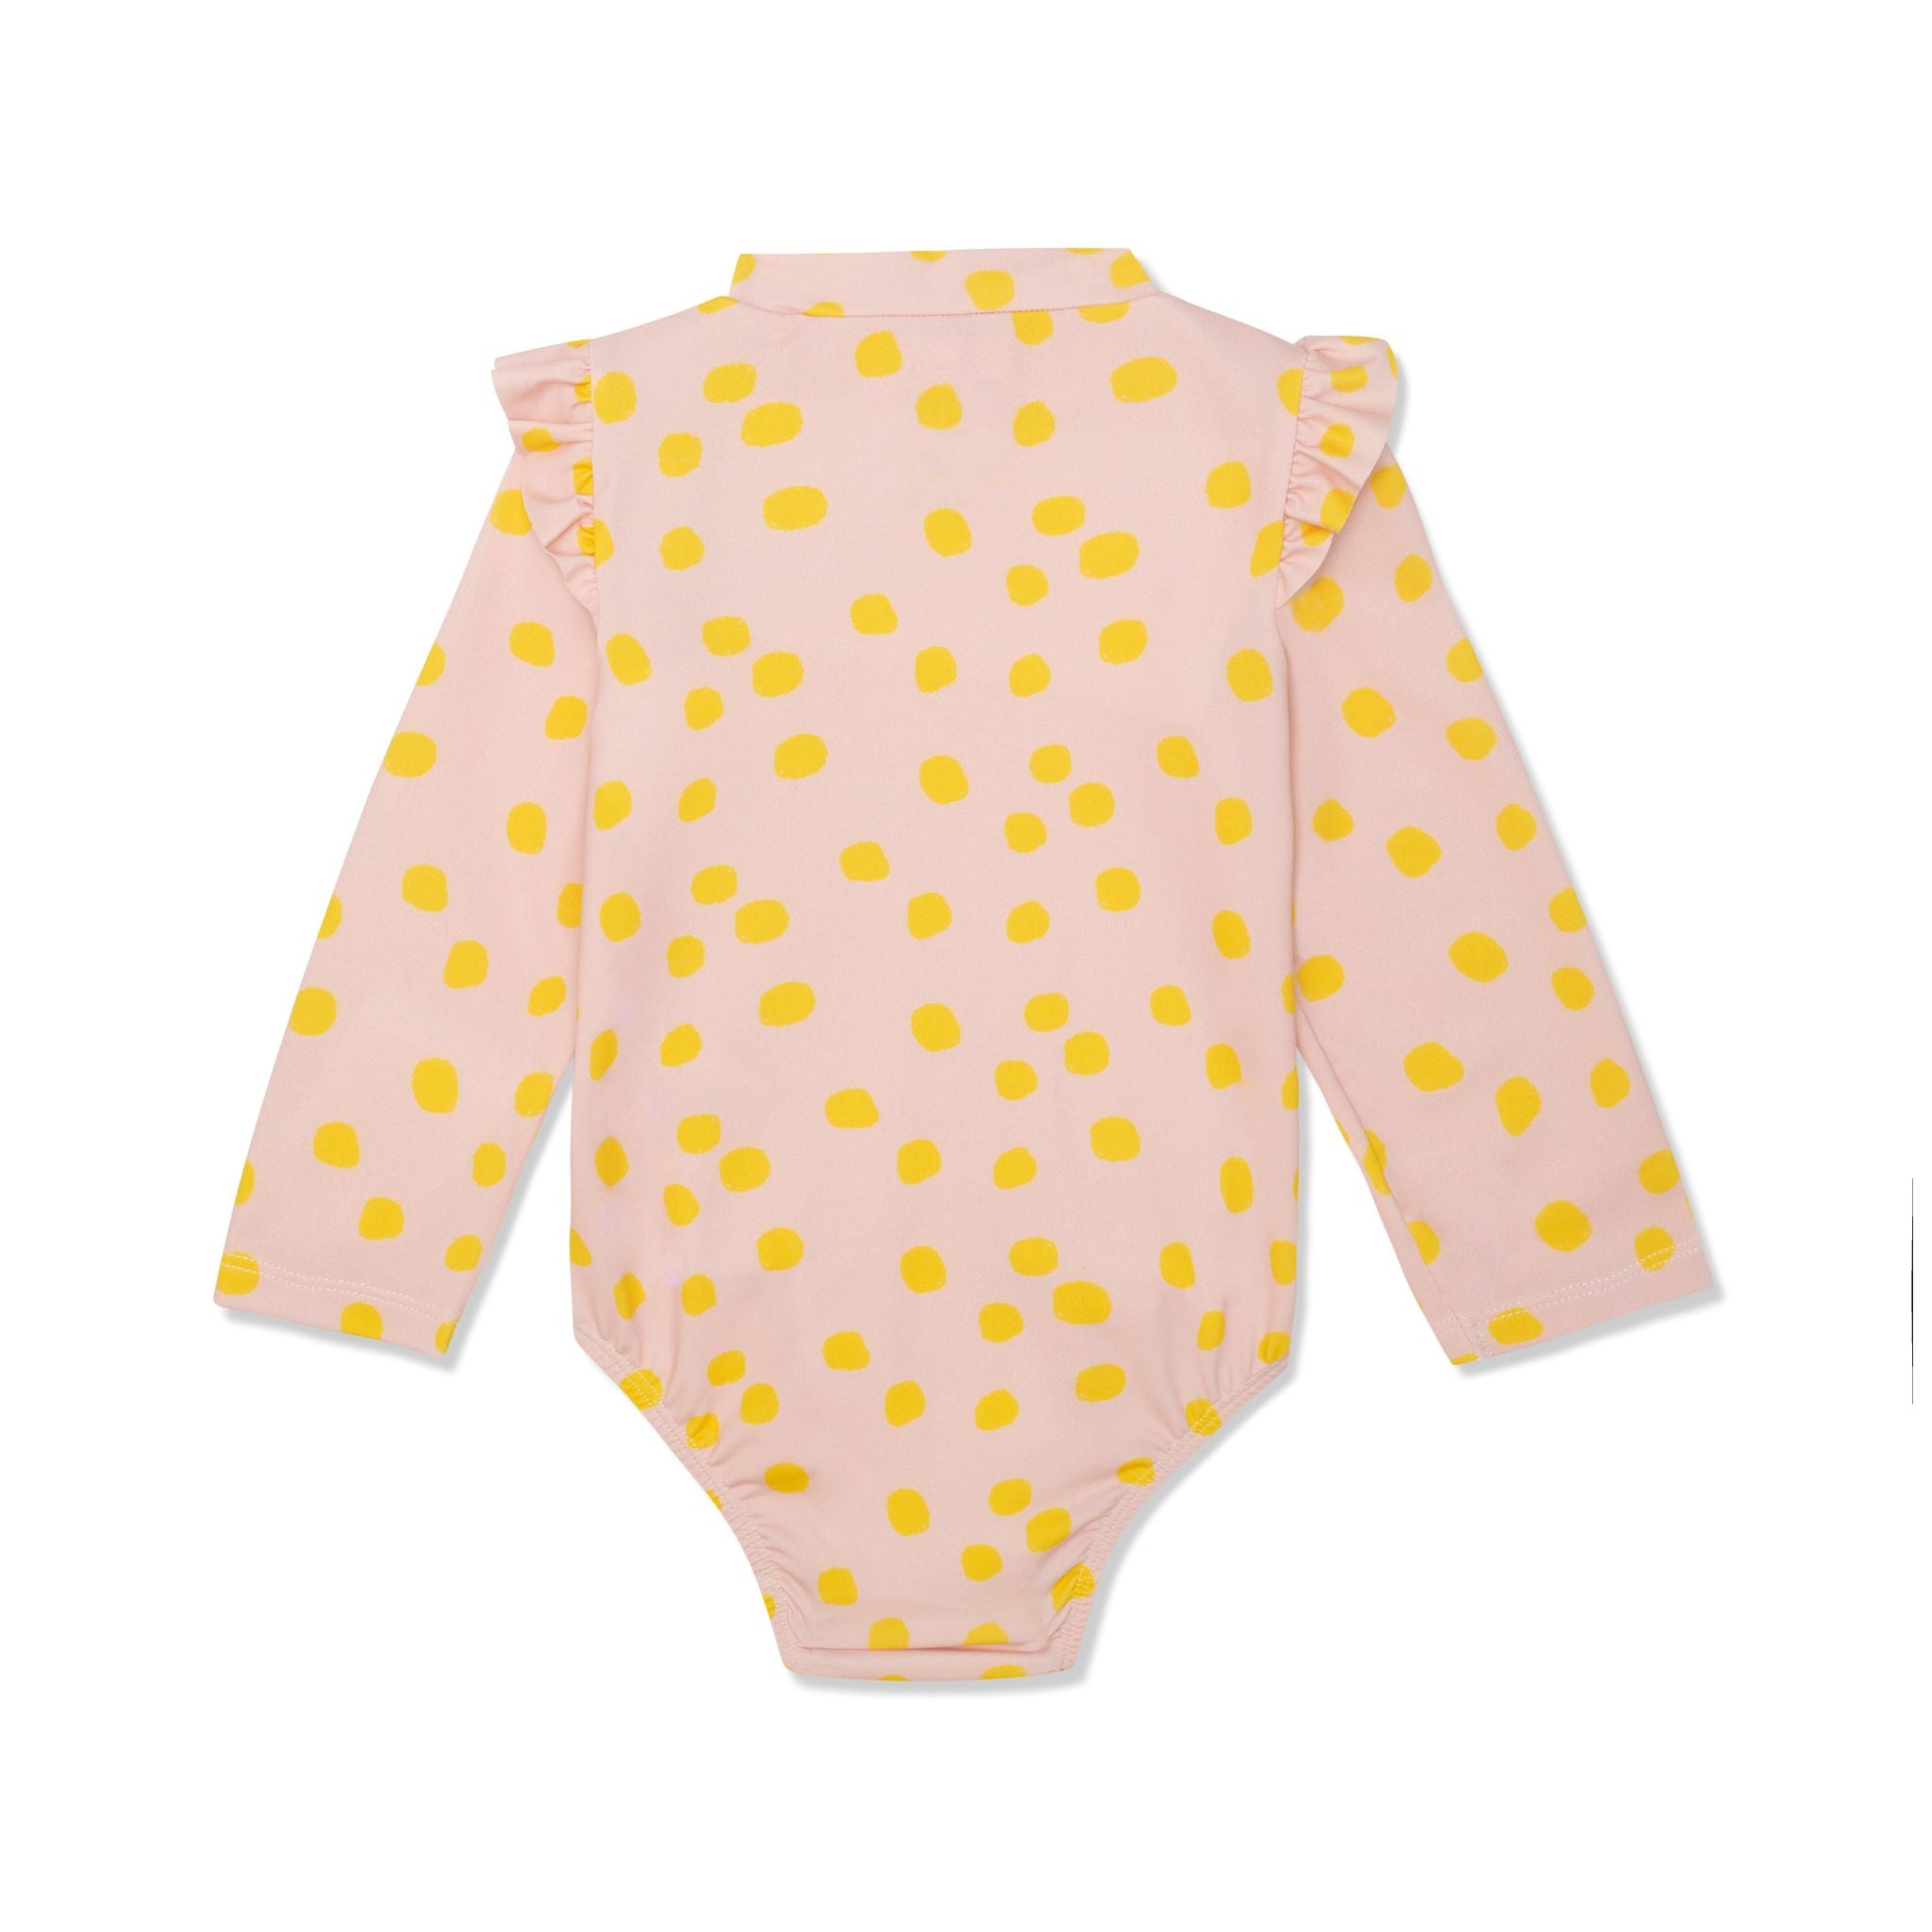 Recycled Polyester Sepia Dotted Zipped Baby Rashguard